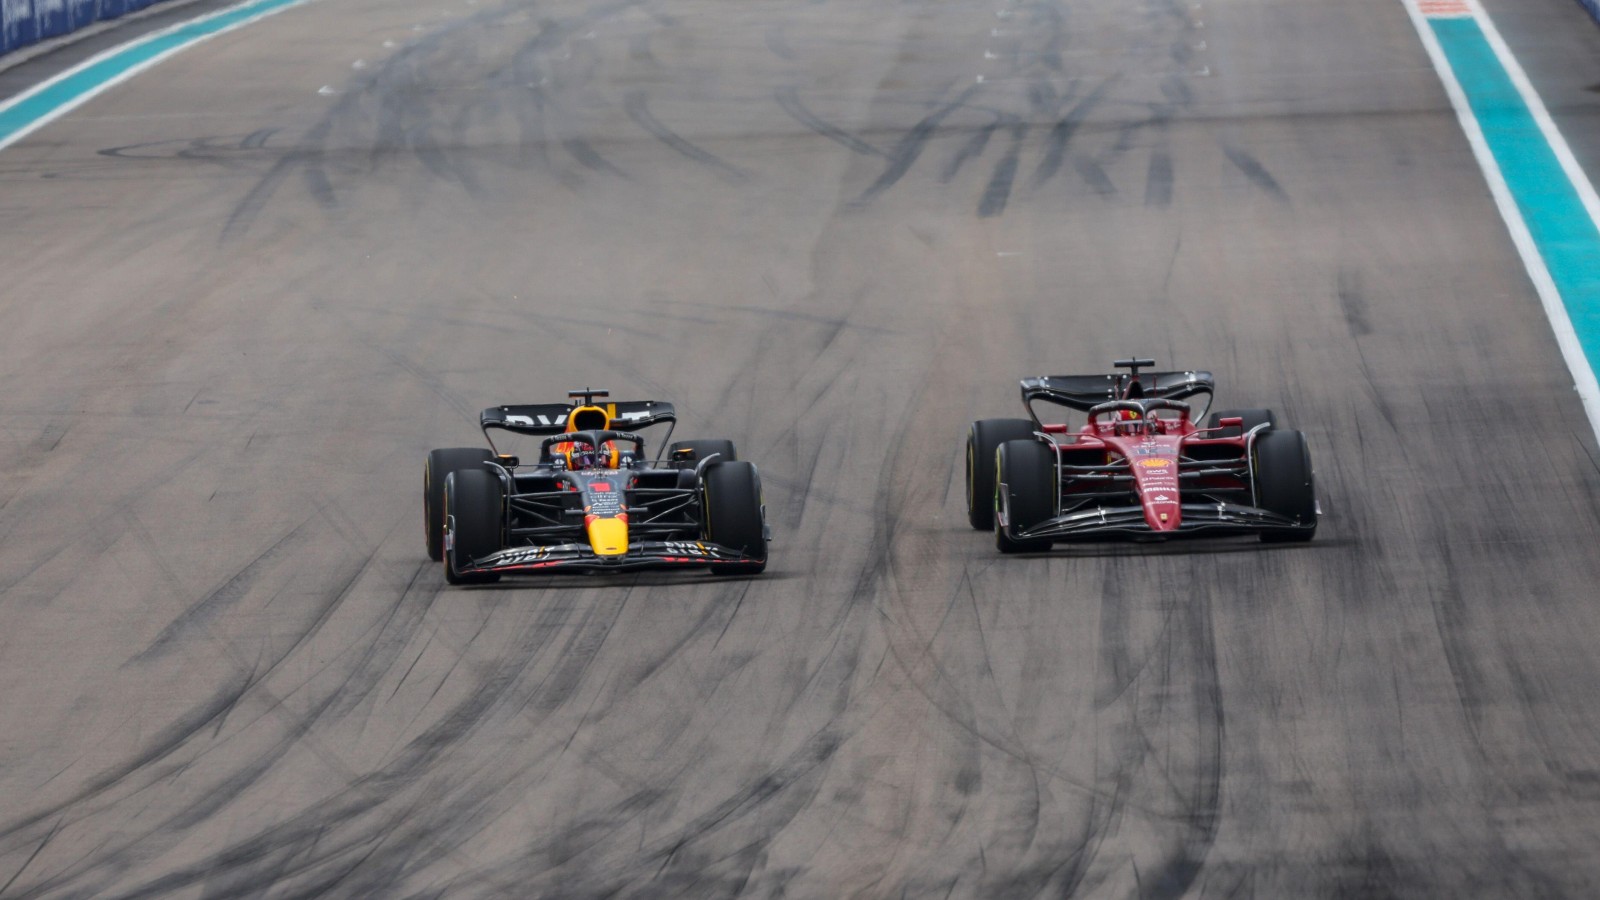 Max Verstappen passes Charles Leclerc in Miami. United States, May 2022.